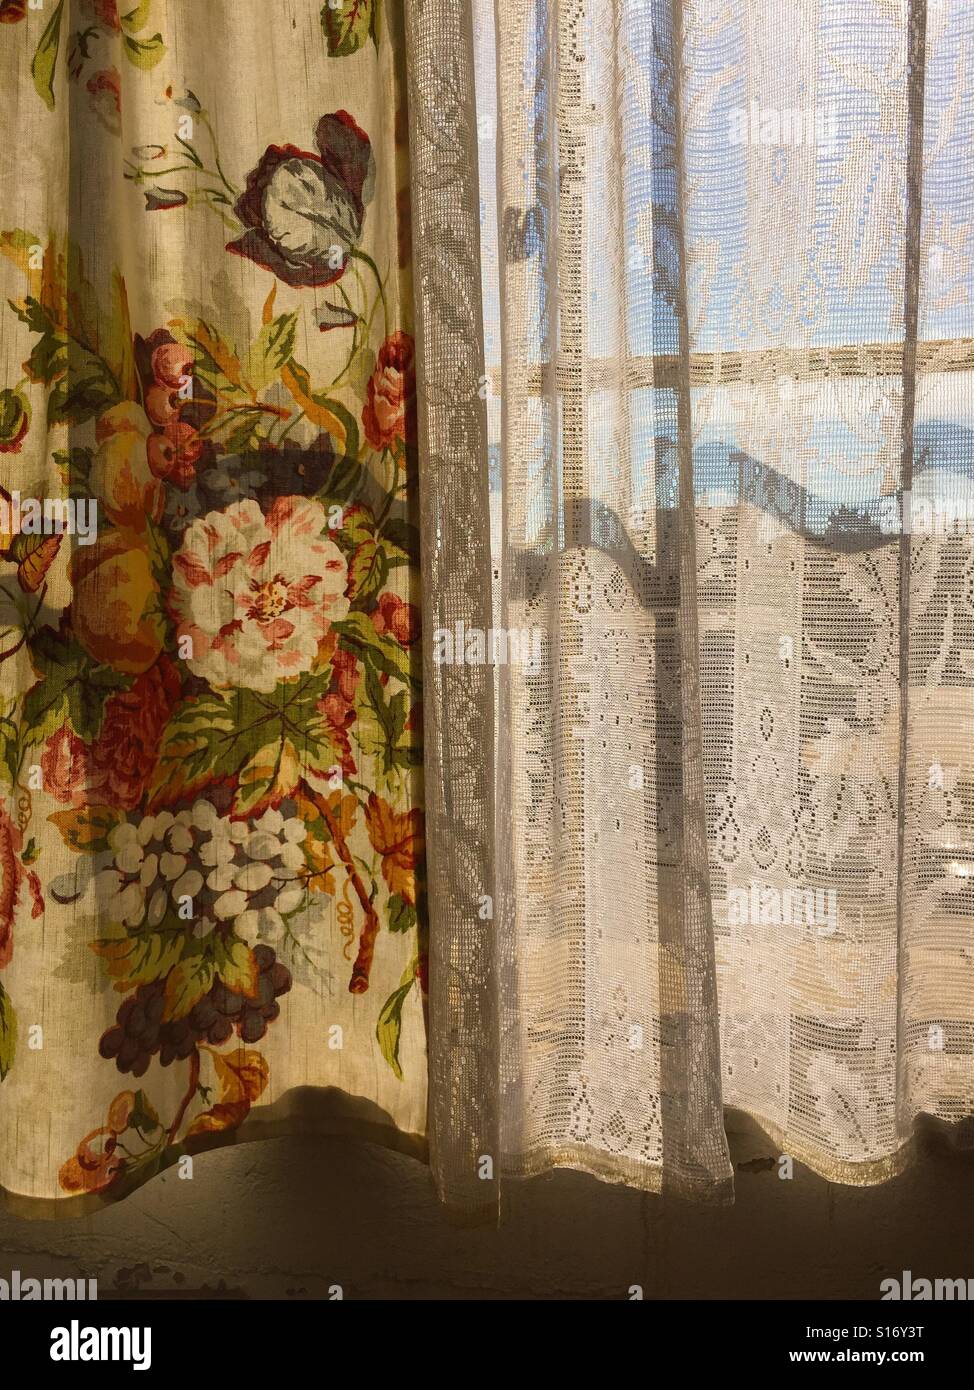 Vintage curtains brushed against a lace sheer covering a window at sundown. Stock Photo